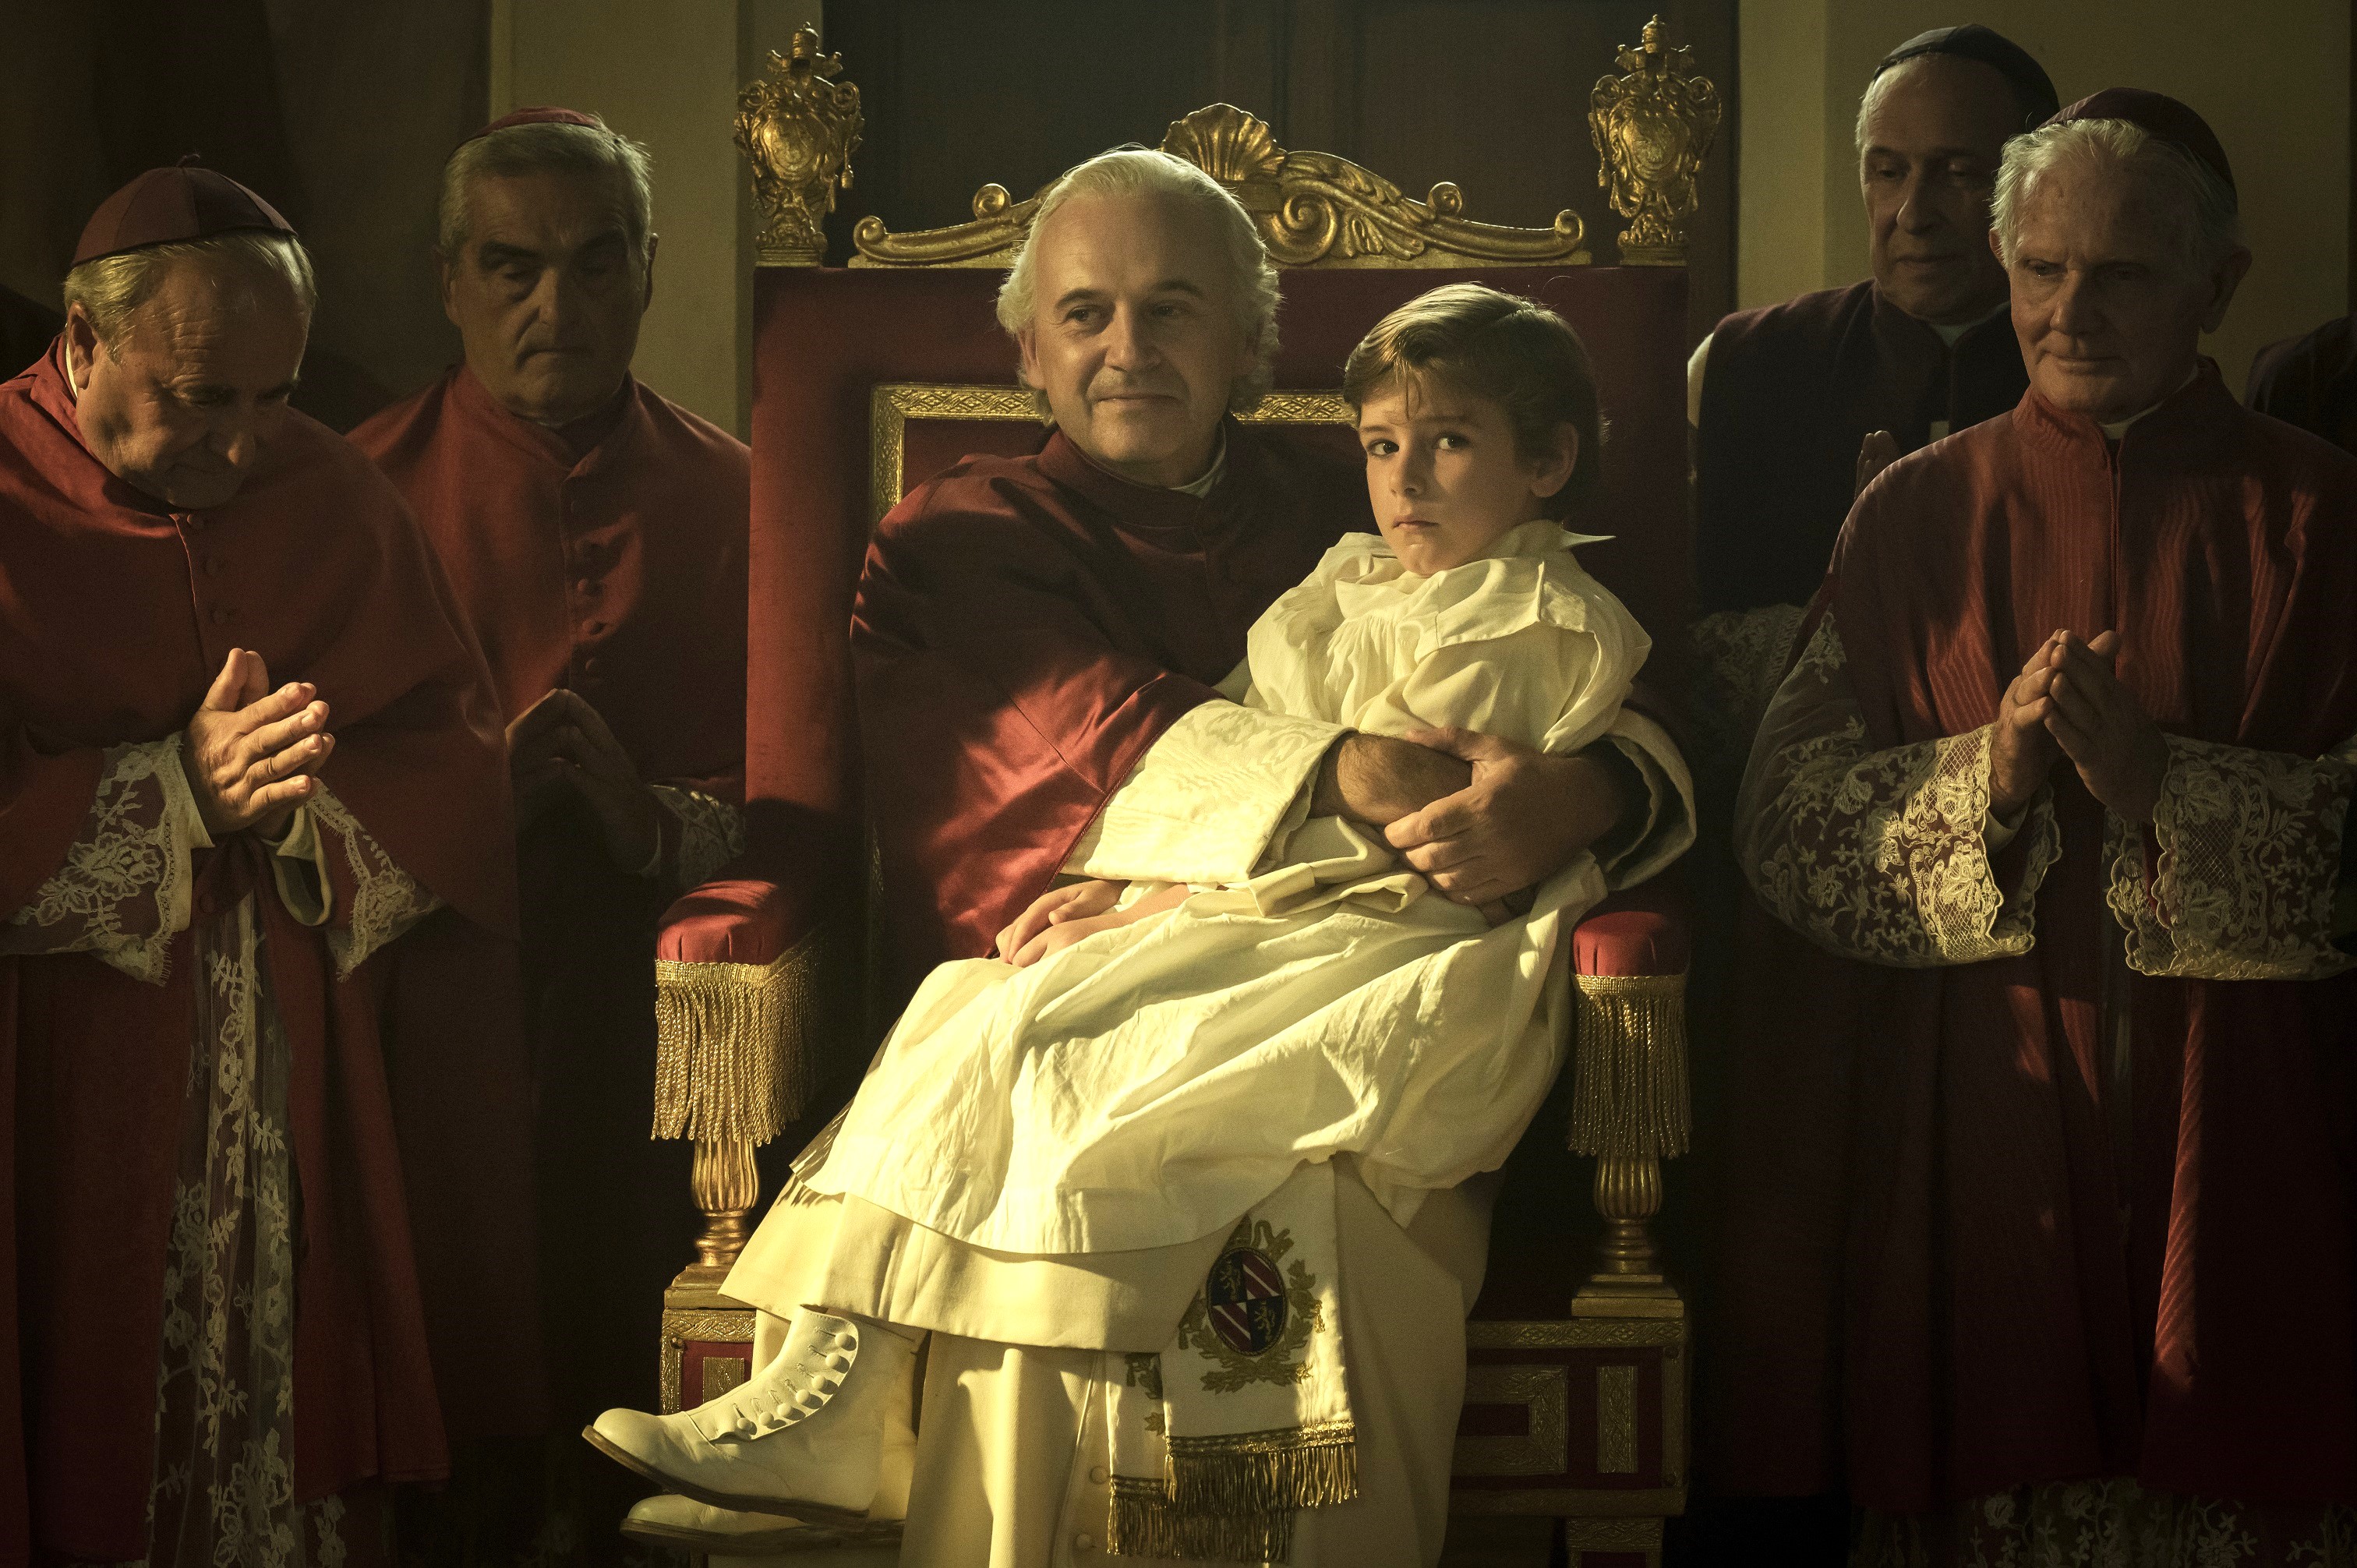 A young boy dressed in a white religious gown sits in the lap of the Pope, sitting on a throne. The two are surrounded by other clergymen.